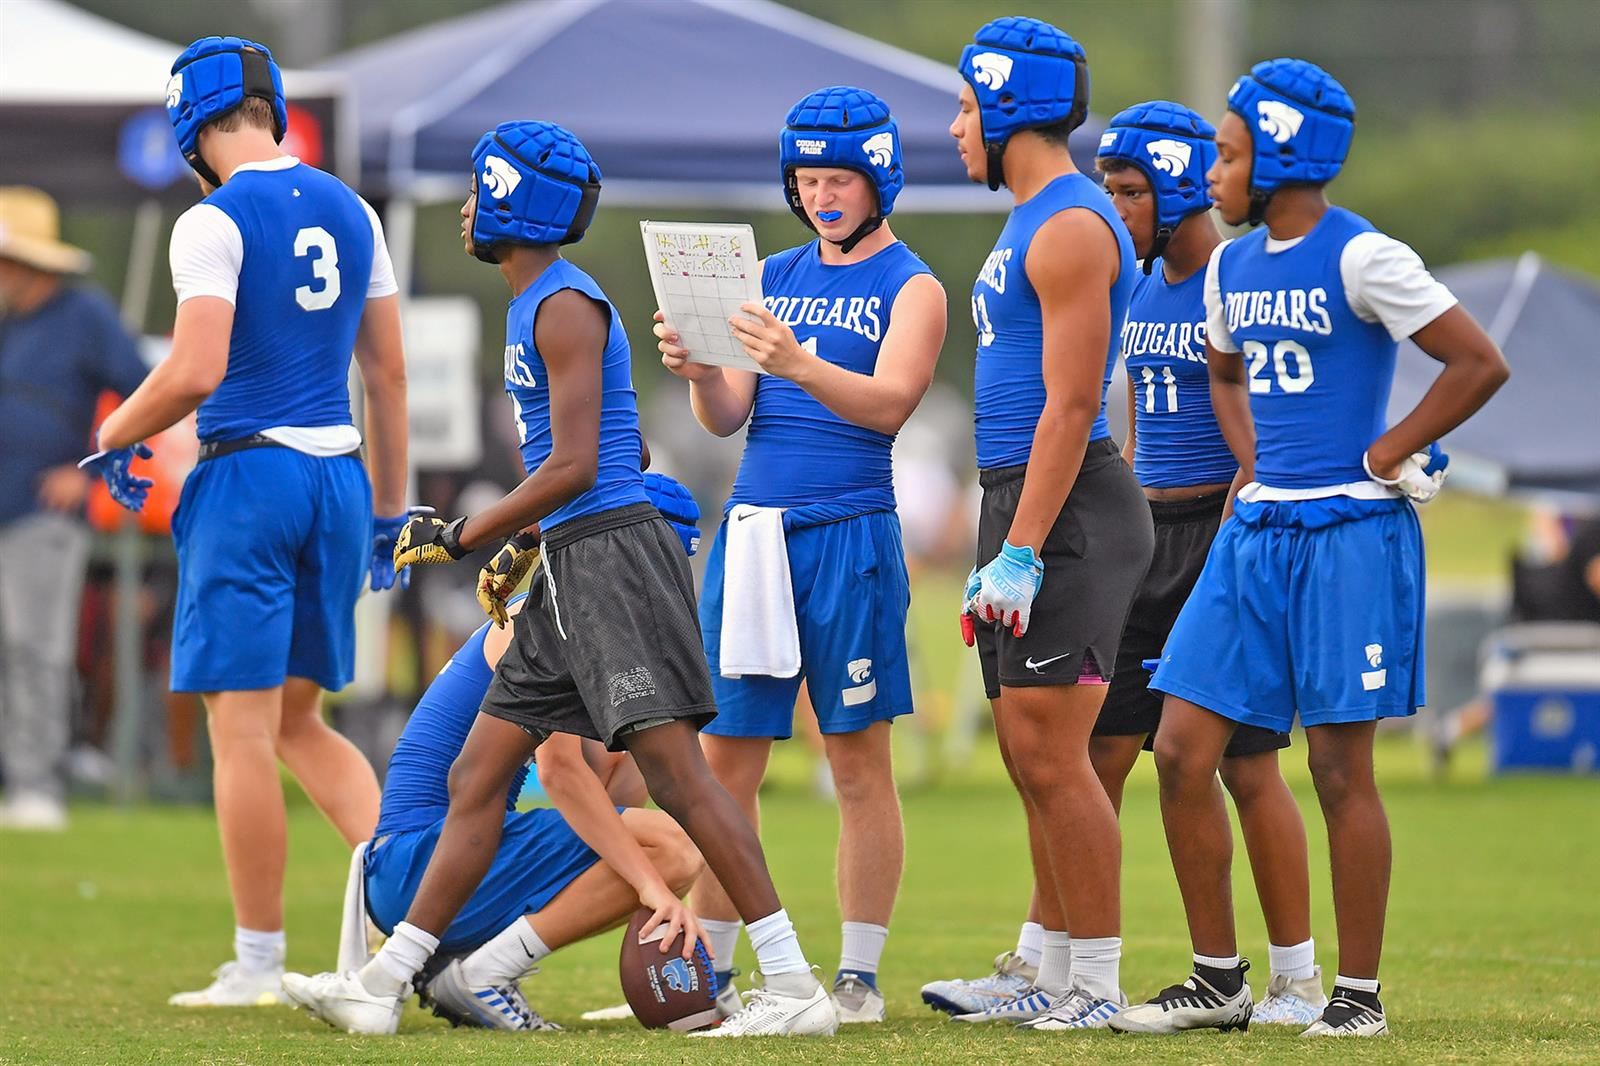 The Cypress Creek 7-on-7 football team finished 0-3 in pool play at the state tournament and fell to Waller.